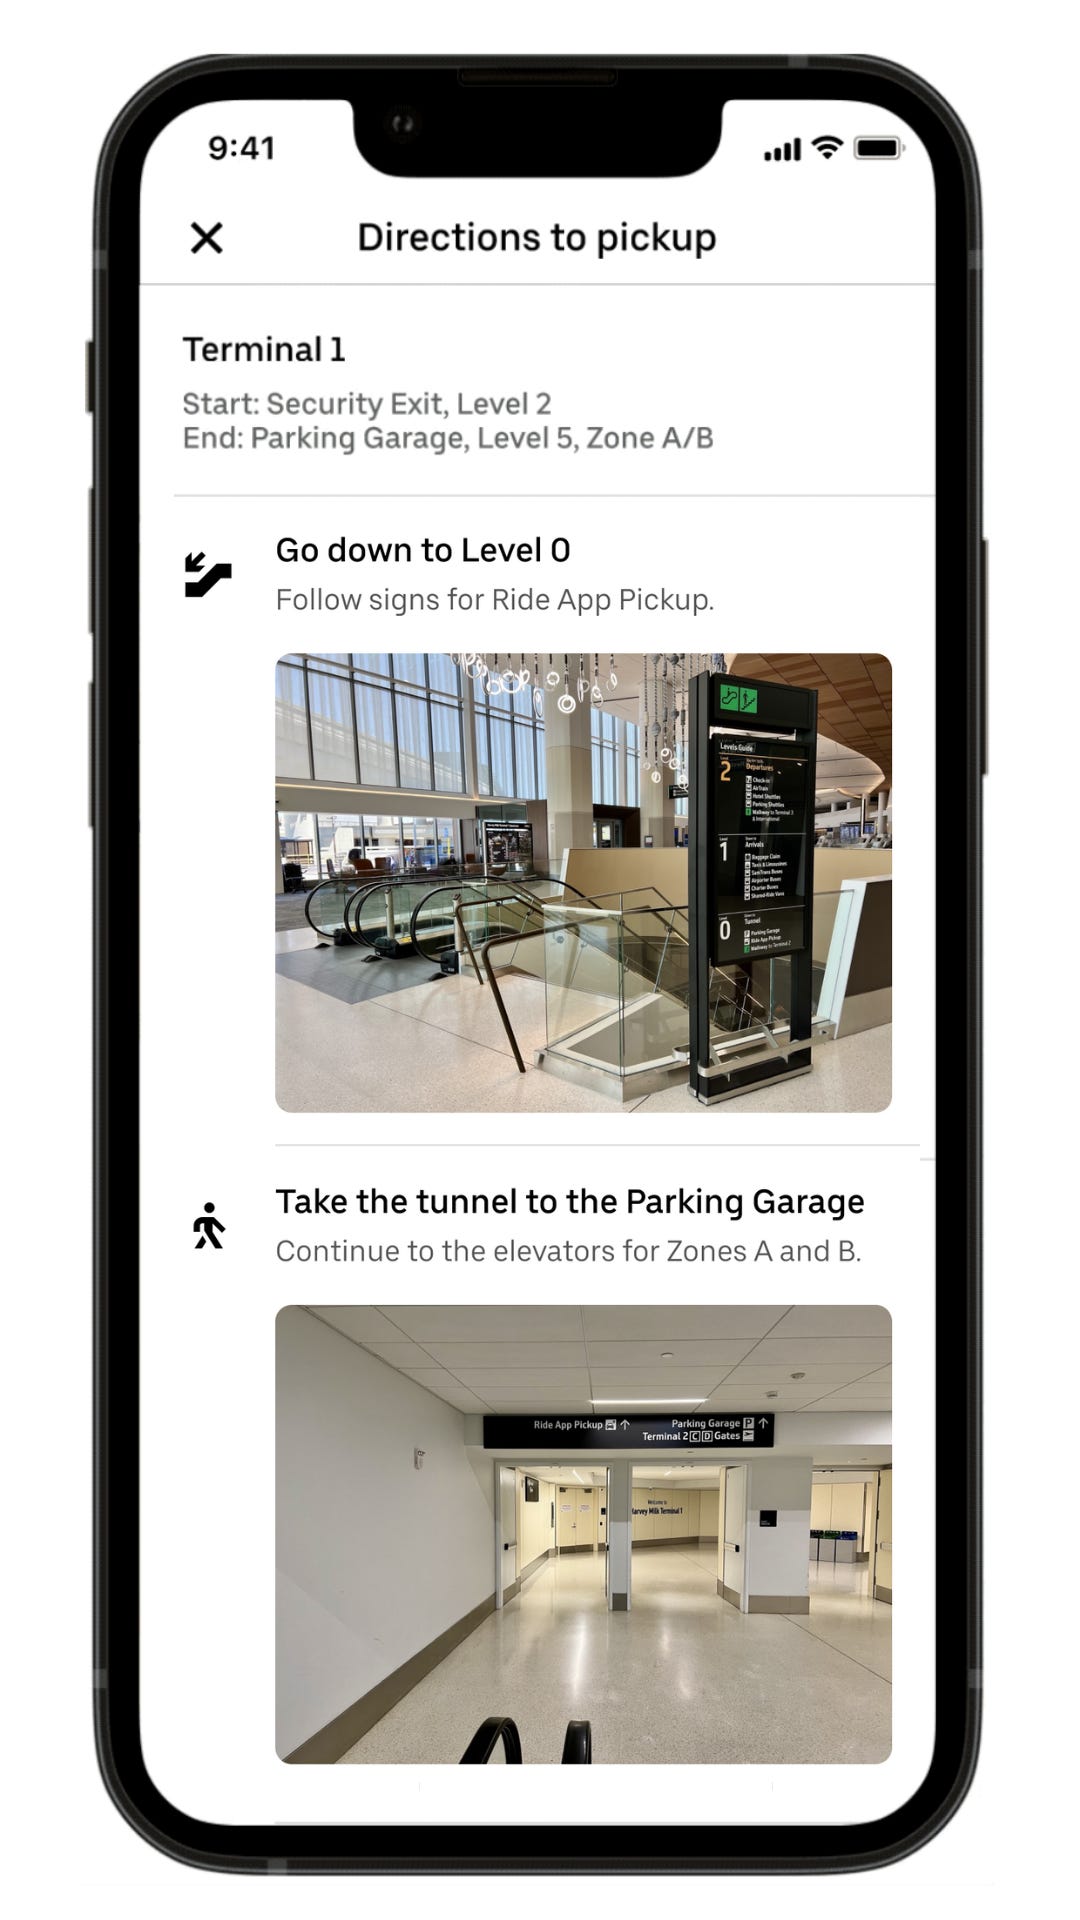 A screenshot of a step-by-step photo guide in Uber's app, taking users from an airport gate to the pickup area outside.